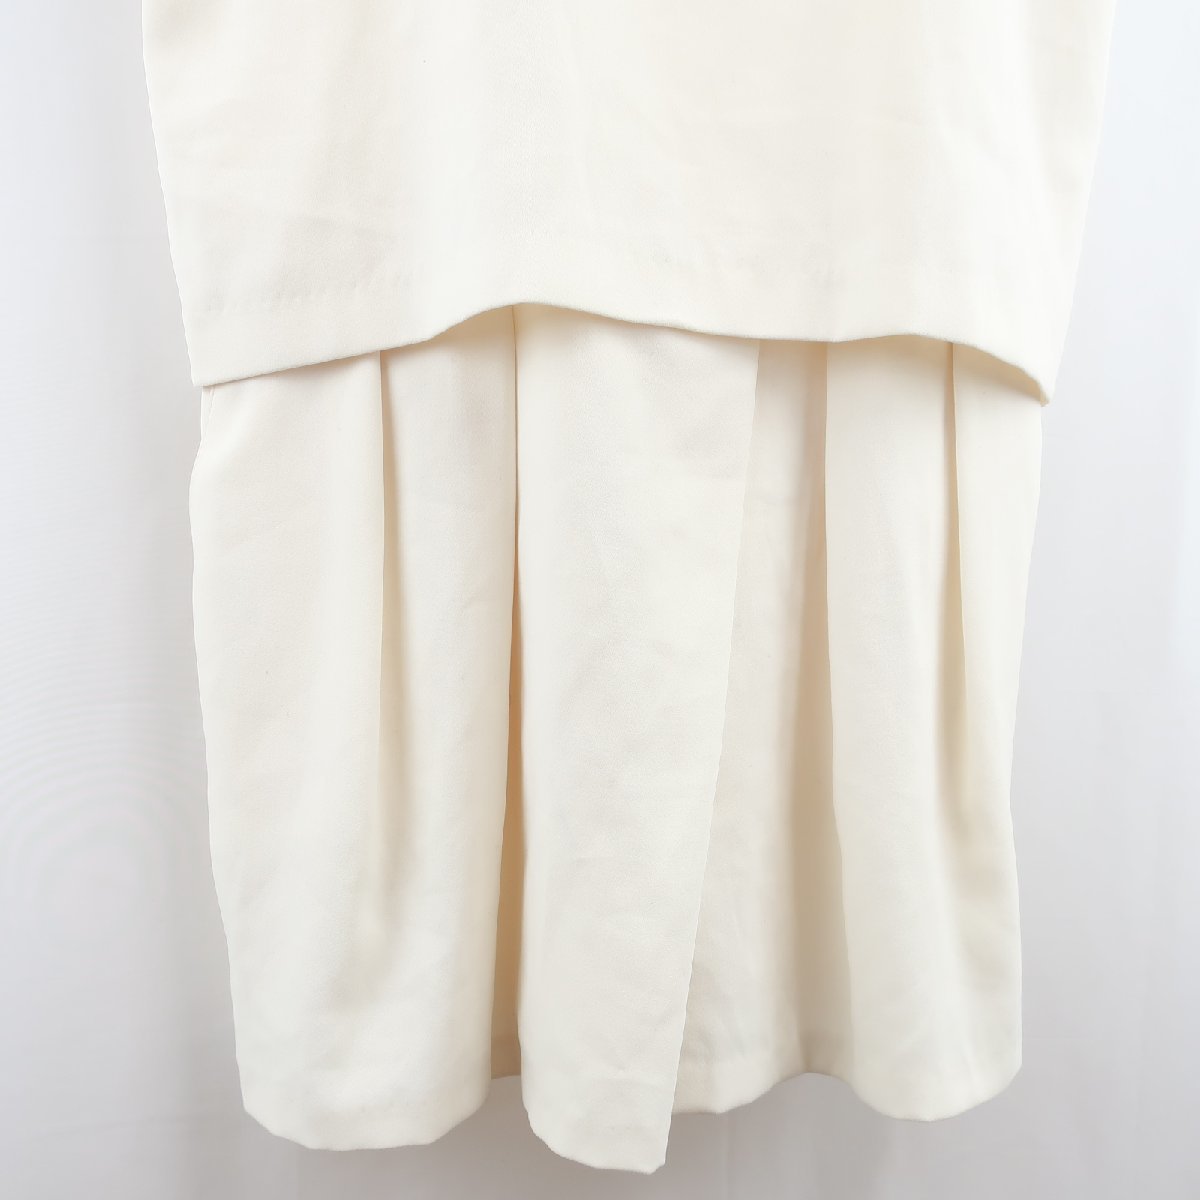  beautiful goods apart by lowrys apartment bai lorry z switch . tuck no sleeve Short all-in-one L white lady's KB1904-825